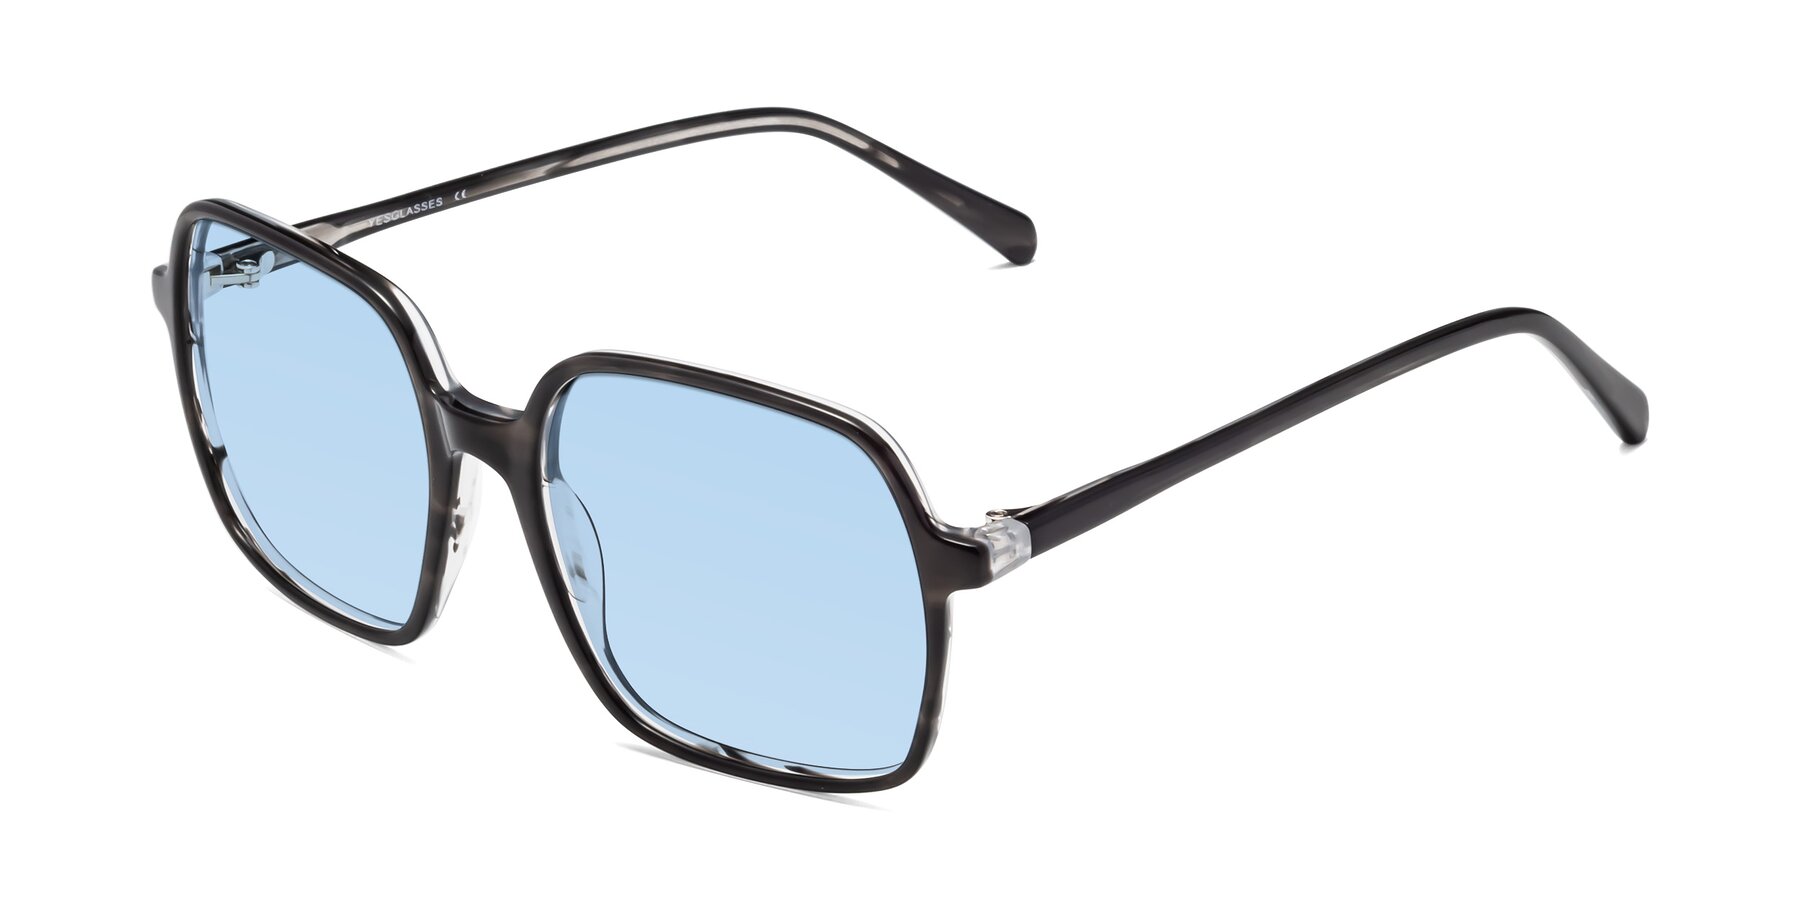 Angle of 1463 in Gray with Light Blue Tinted Lenses